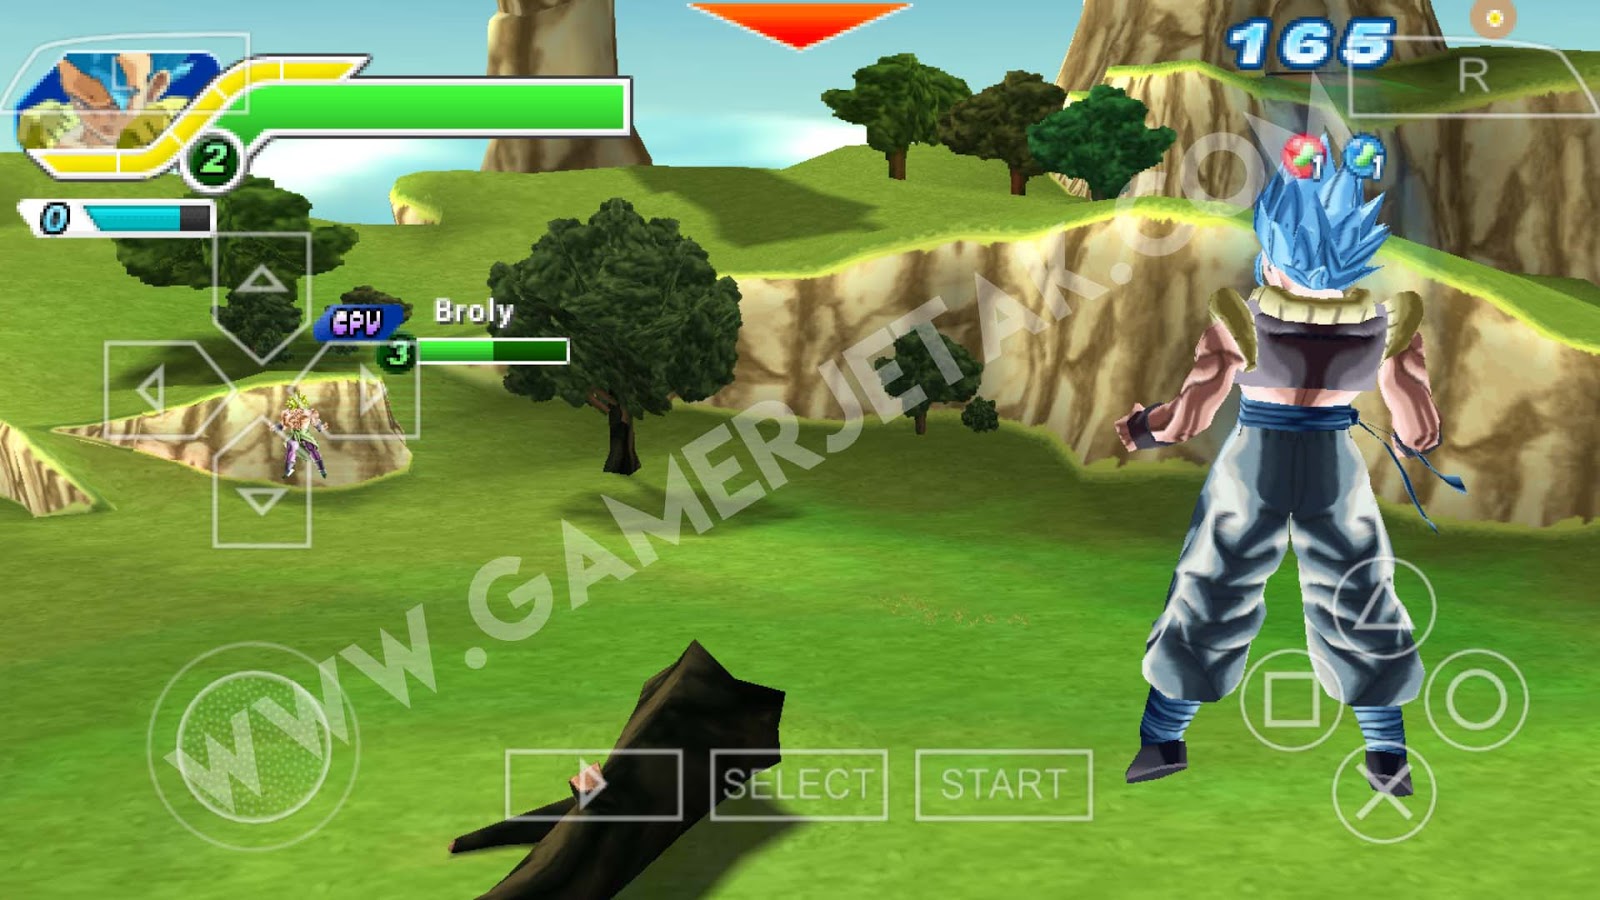 Dragon ball xenoverse 2 ppsspp download for android